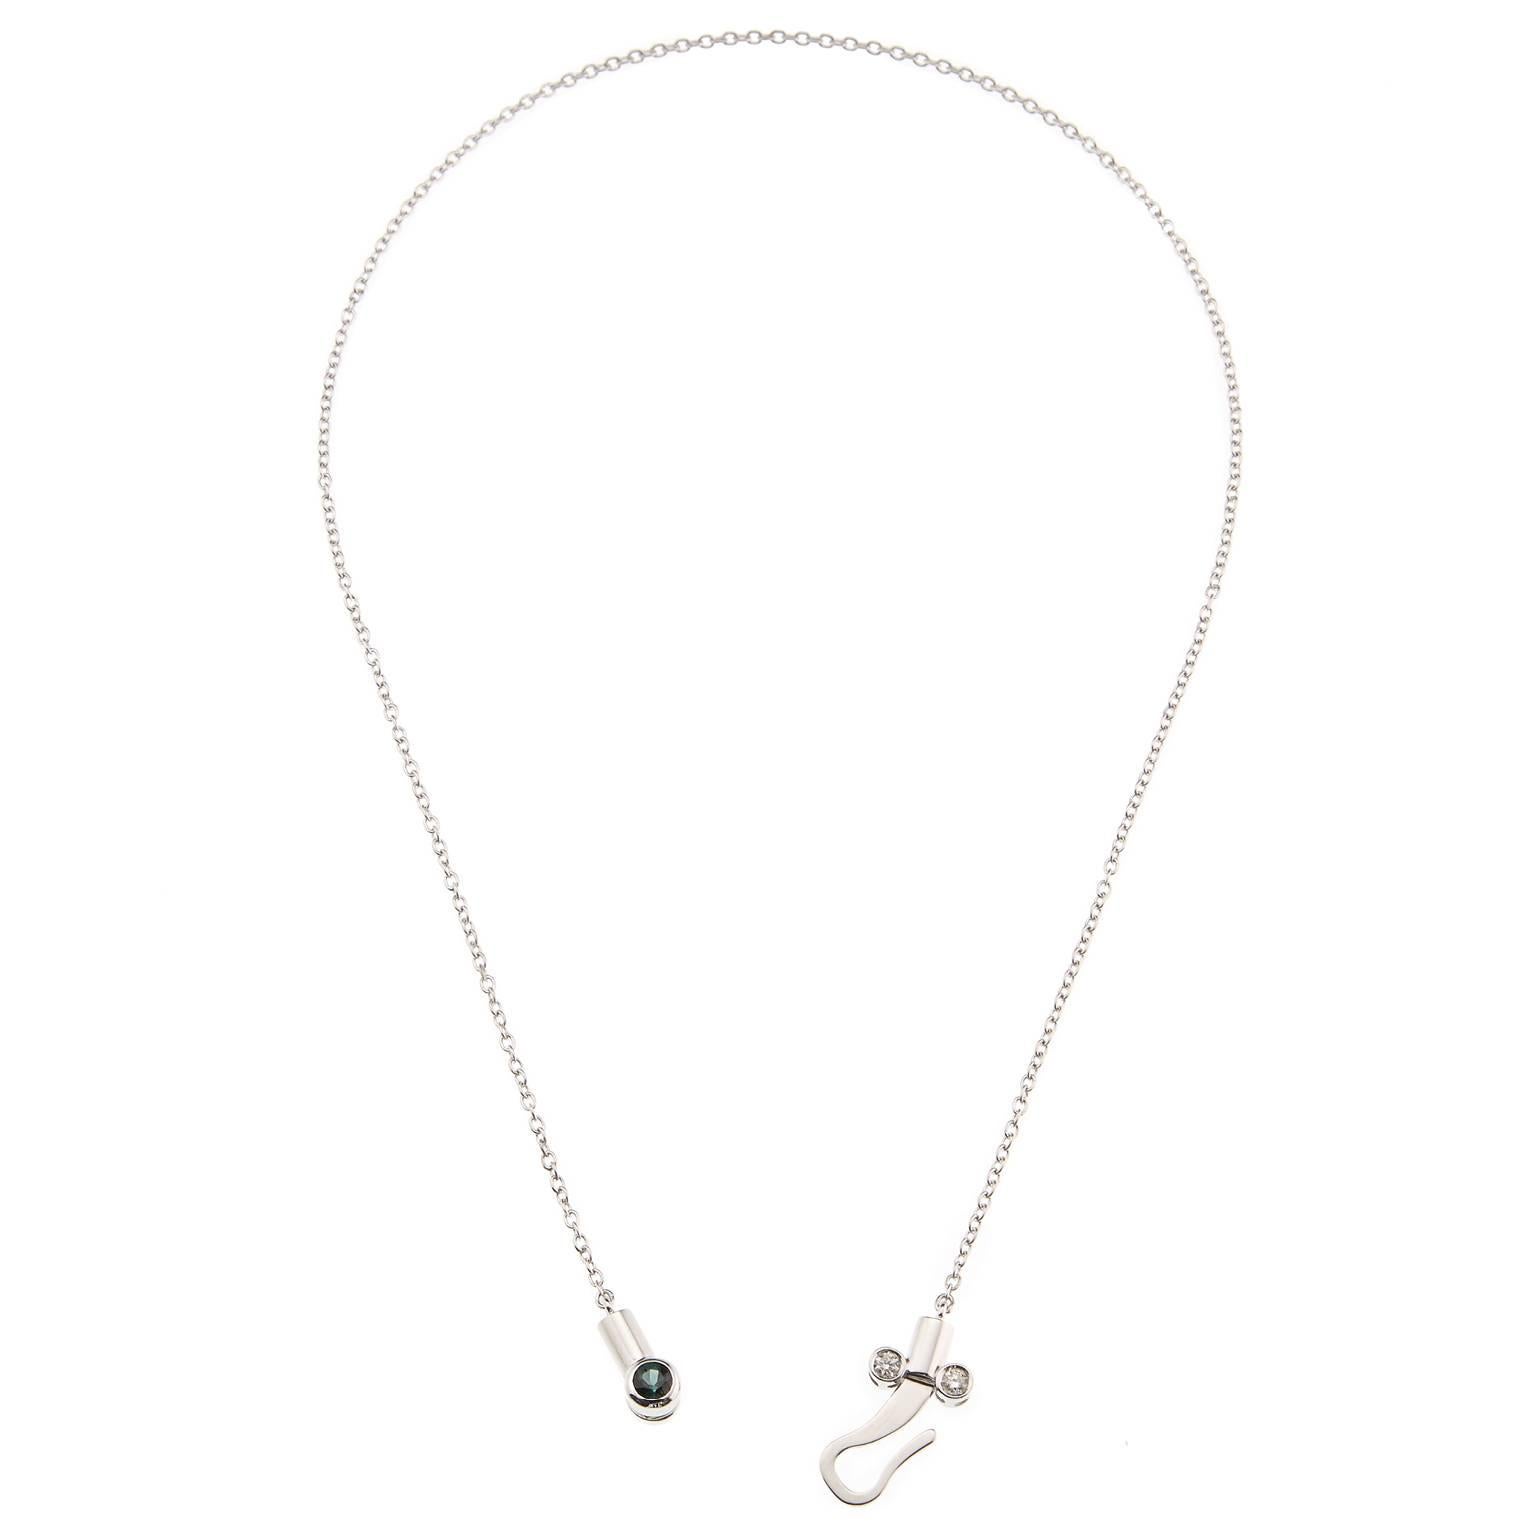 Micro pendant drop necklace in 18 karat white gold from the Microcosmos Series, is devised as a game, a construction or a sophisticated aerial mobile. Shapes attached to gold settings dangle lightly on the neck, their geometry pierced by diamonds